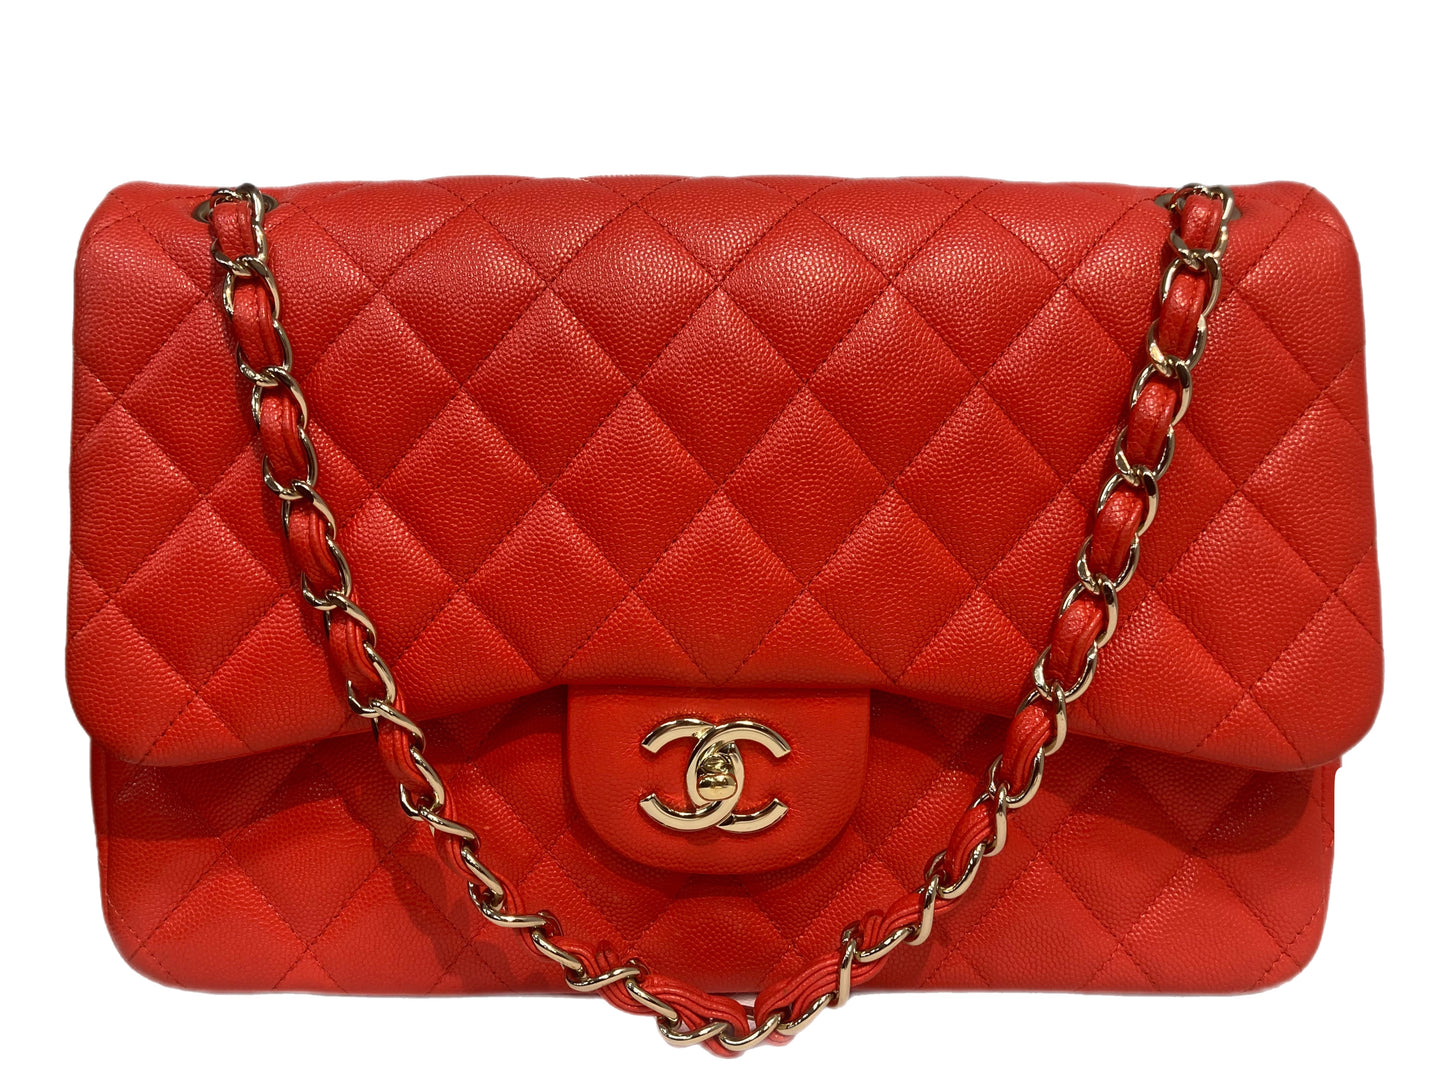 CHANEL Jumbo Caviar Leather Quilted Double Flap Handbag Orange/Red